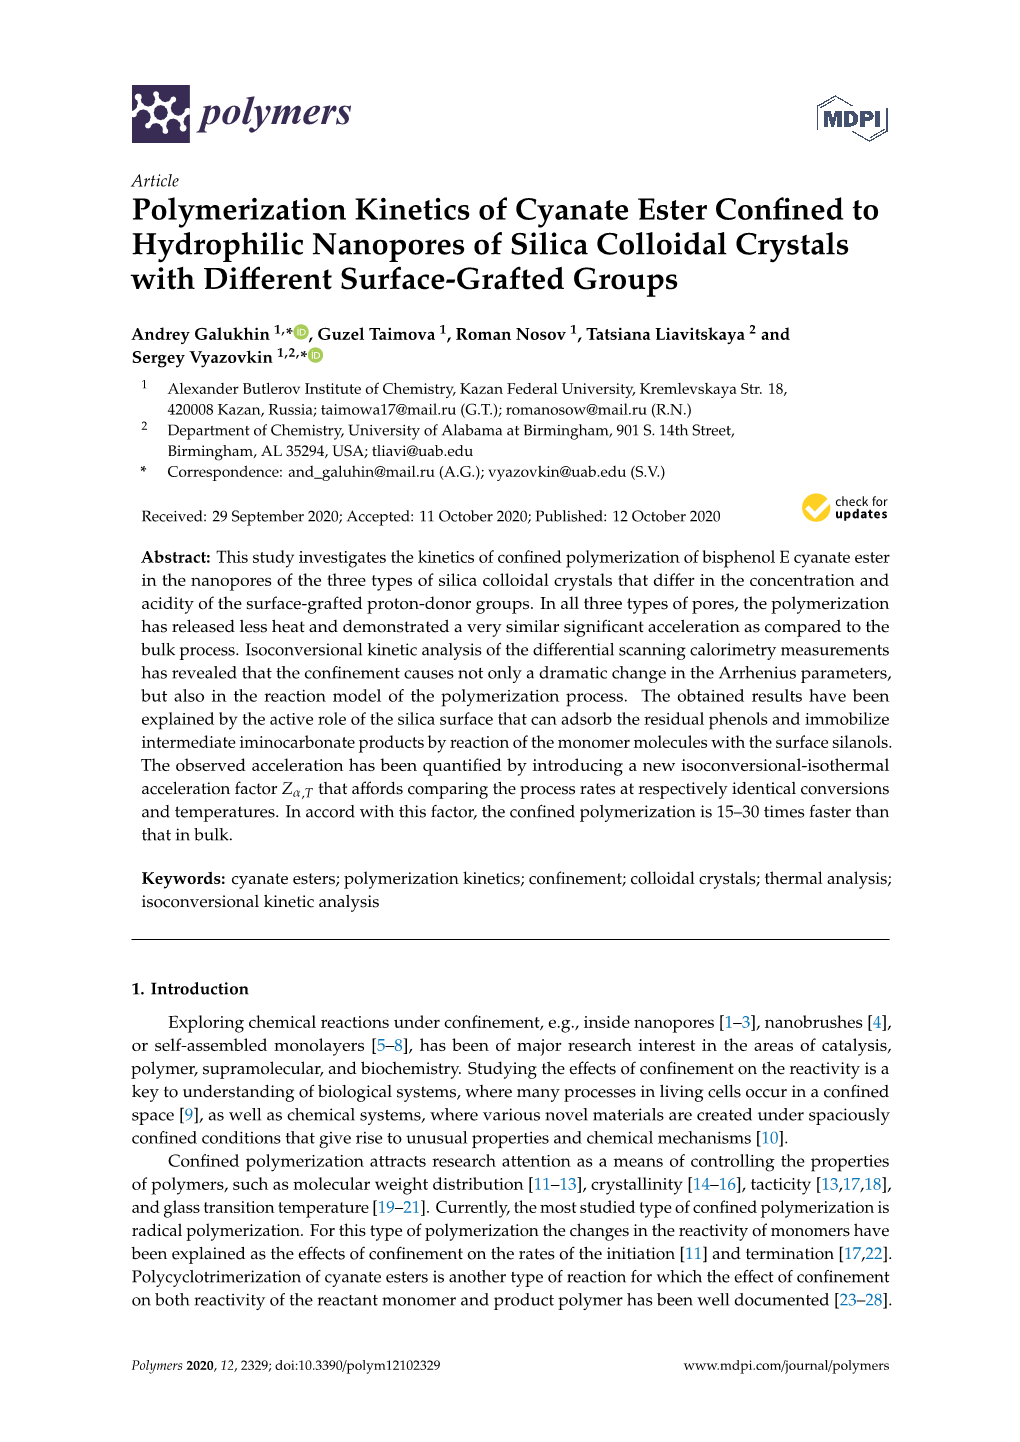 Polymerization Kinetics of Cyanate Ester Confined to Hydrophilic Nanopores of Silica Colloidal Crystals with Different Surface-G